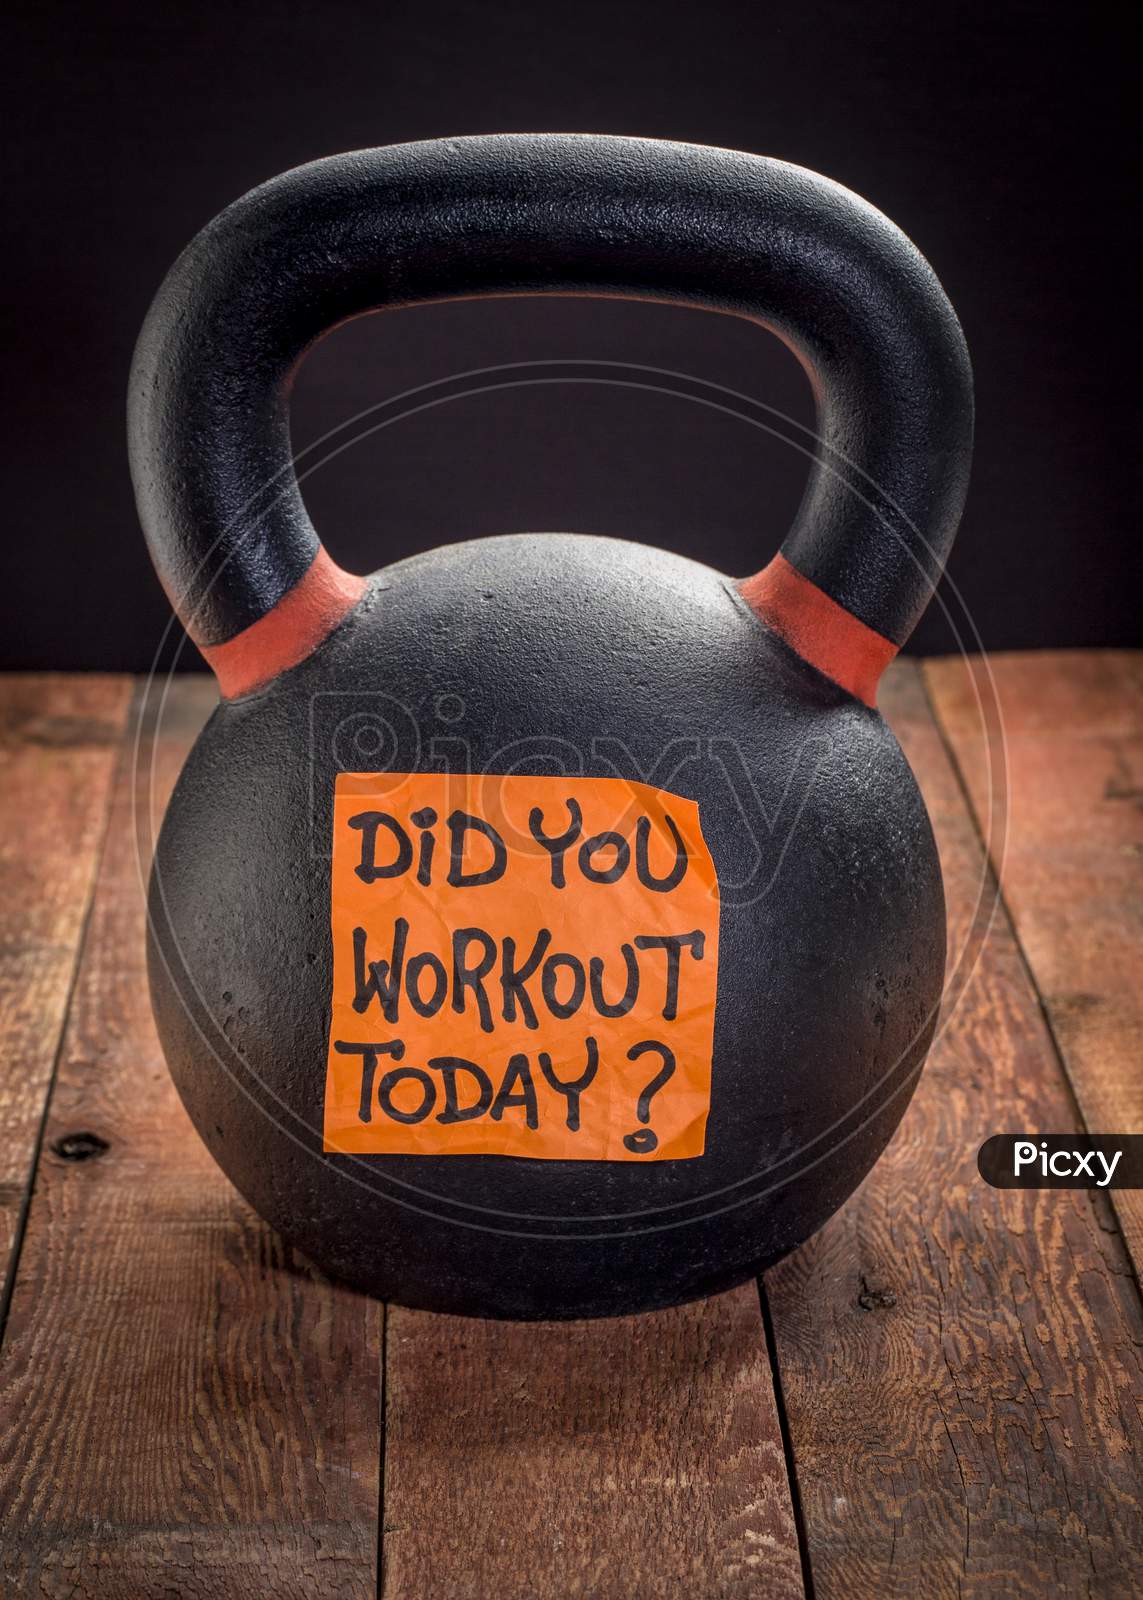 Did You Workout Today?  Reminder Note On A Heavy Iron Kettlebell Against A Rustic Wood Background - Exercise, Weight Training And Fitness Concept